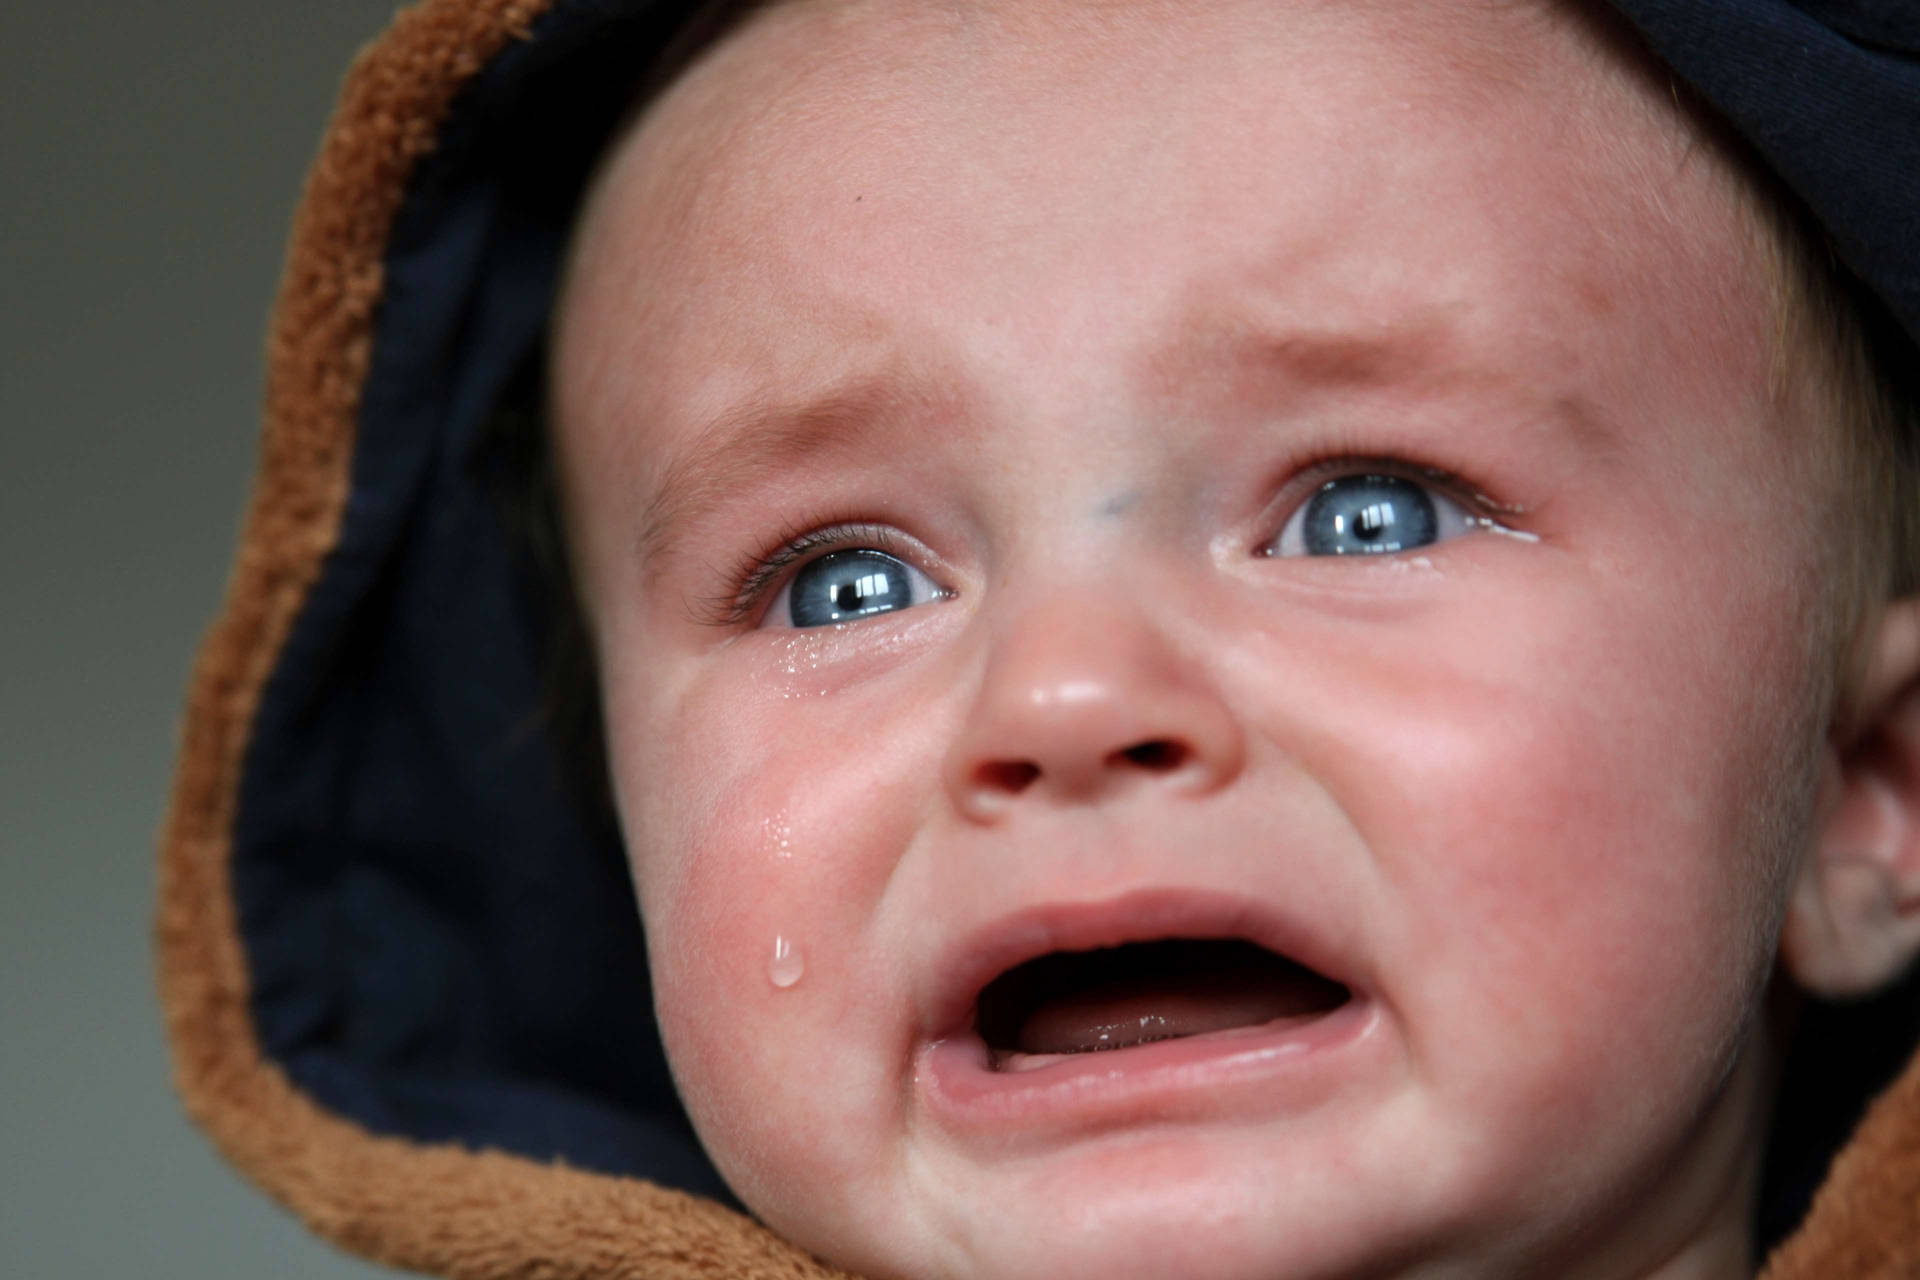 Crying Funny Baby With Blue Eyes